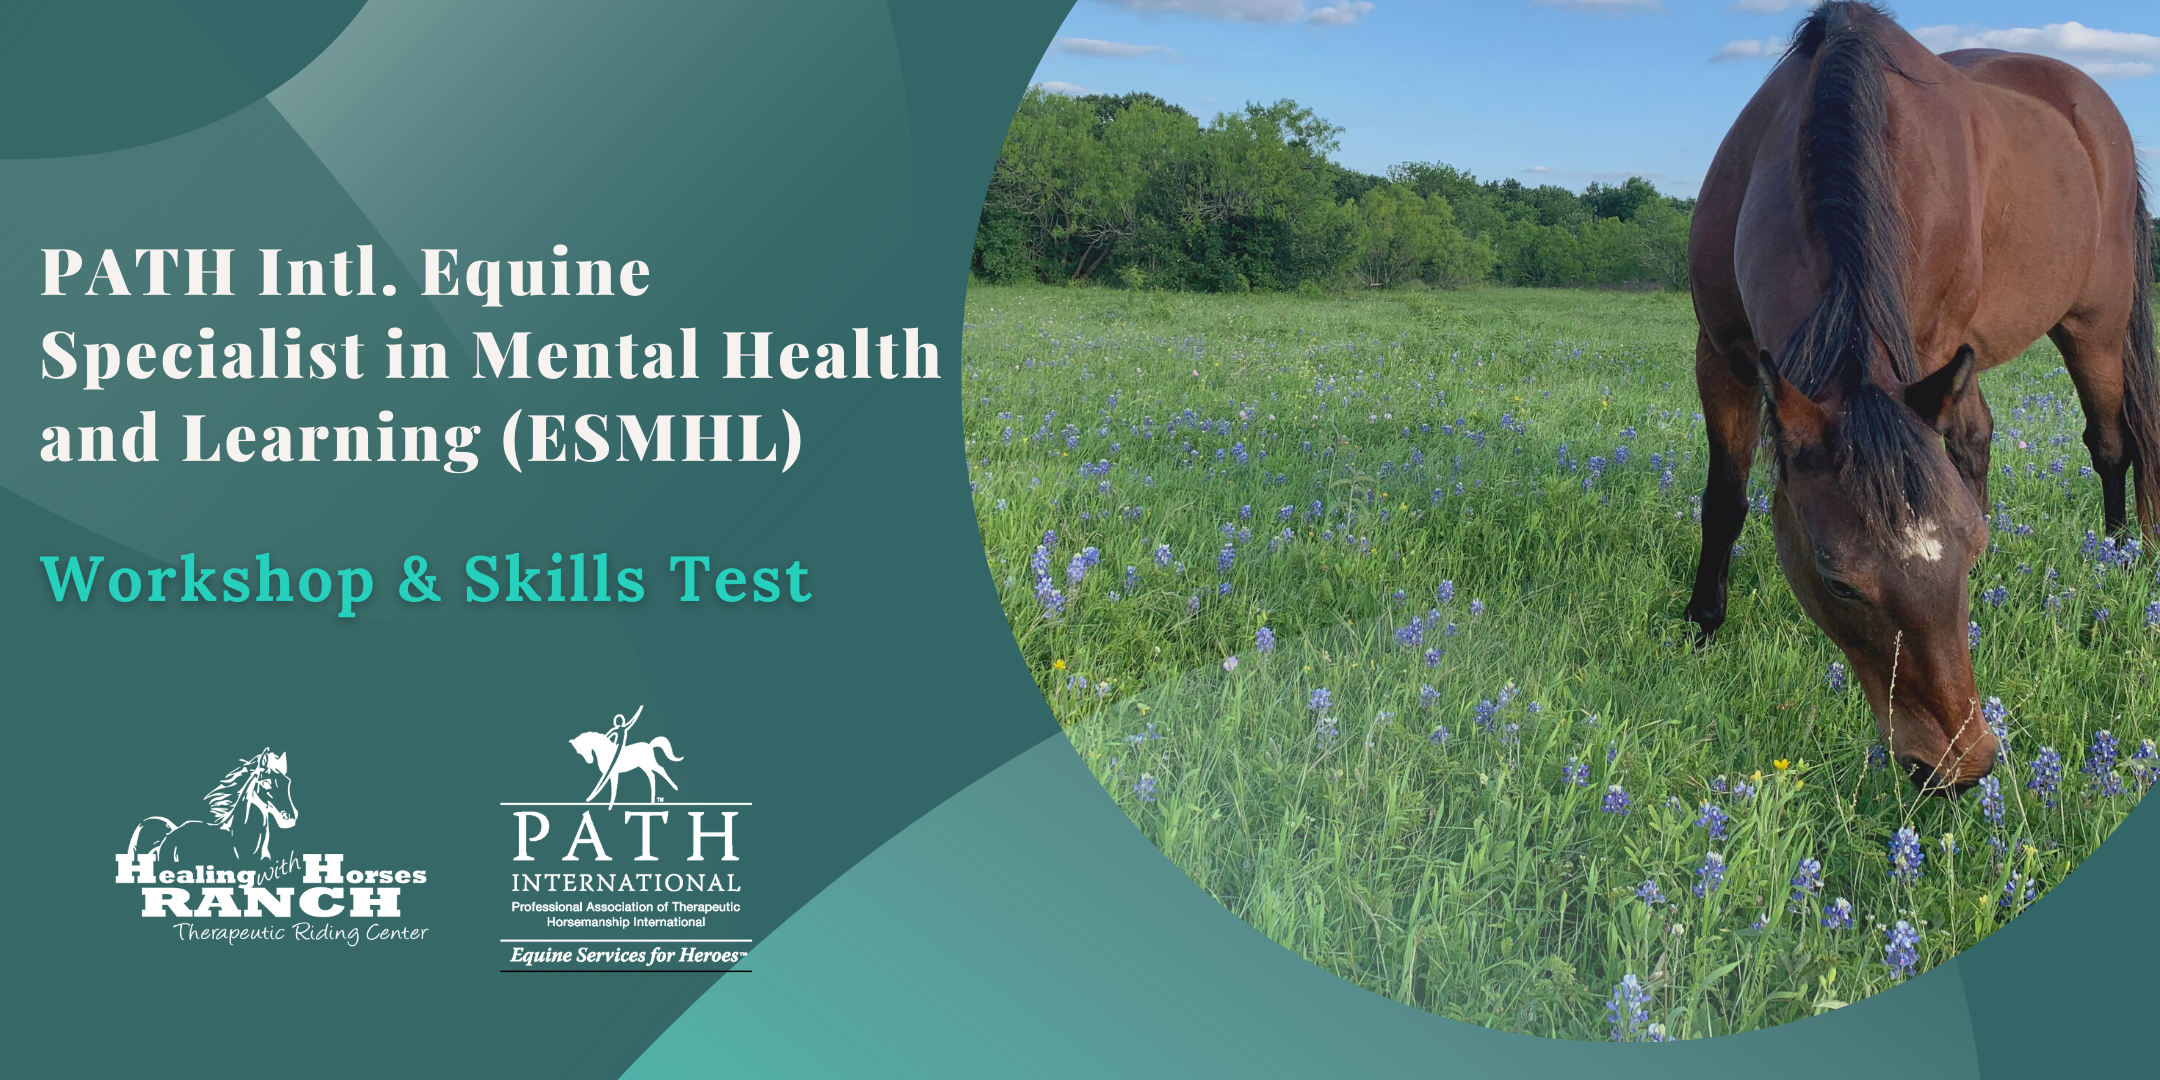 You are currently viewing PATH Intl Equine Specialist in Mental Health and Learning Workshop & Test